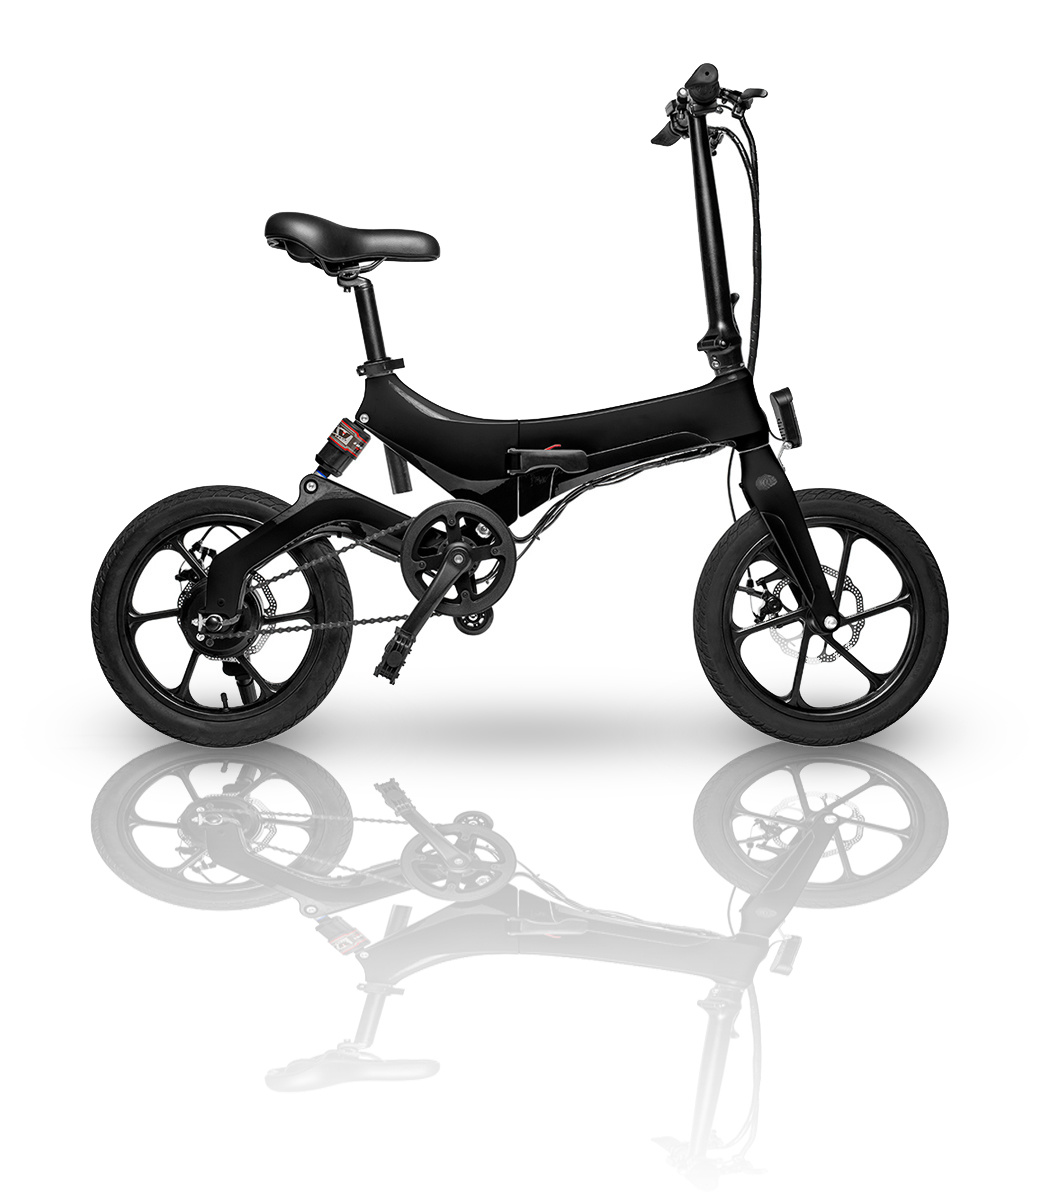 jetson bike to go review